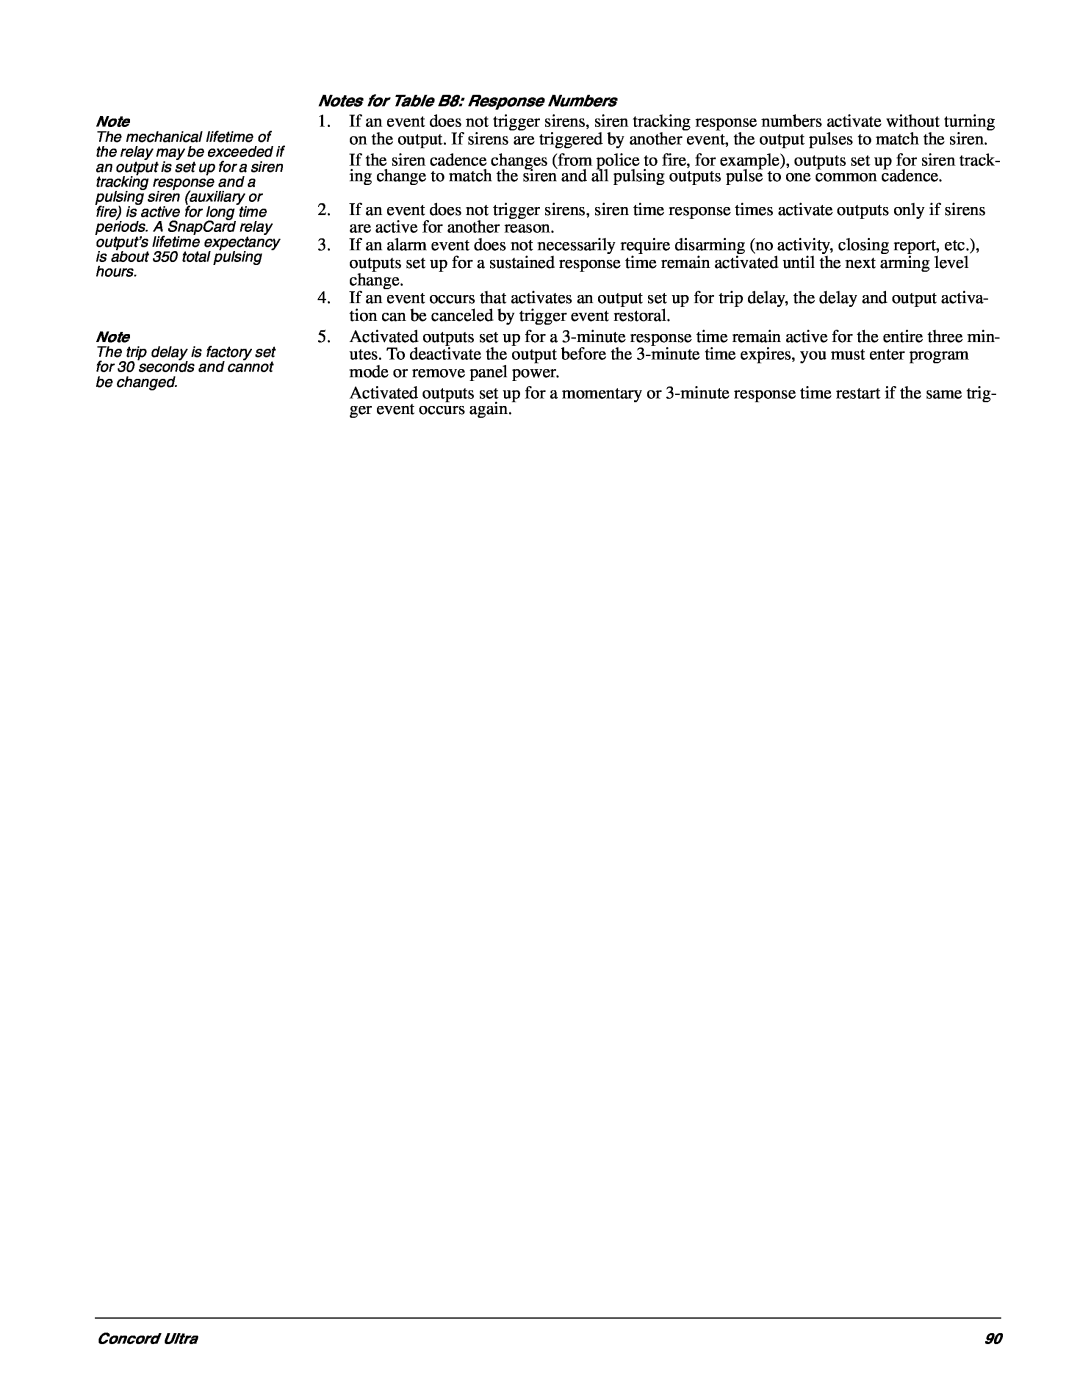 GE 60-960-95 installation instructions Notes for Table B8: Response Numbers, Concord Ultra 